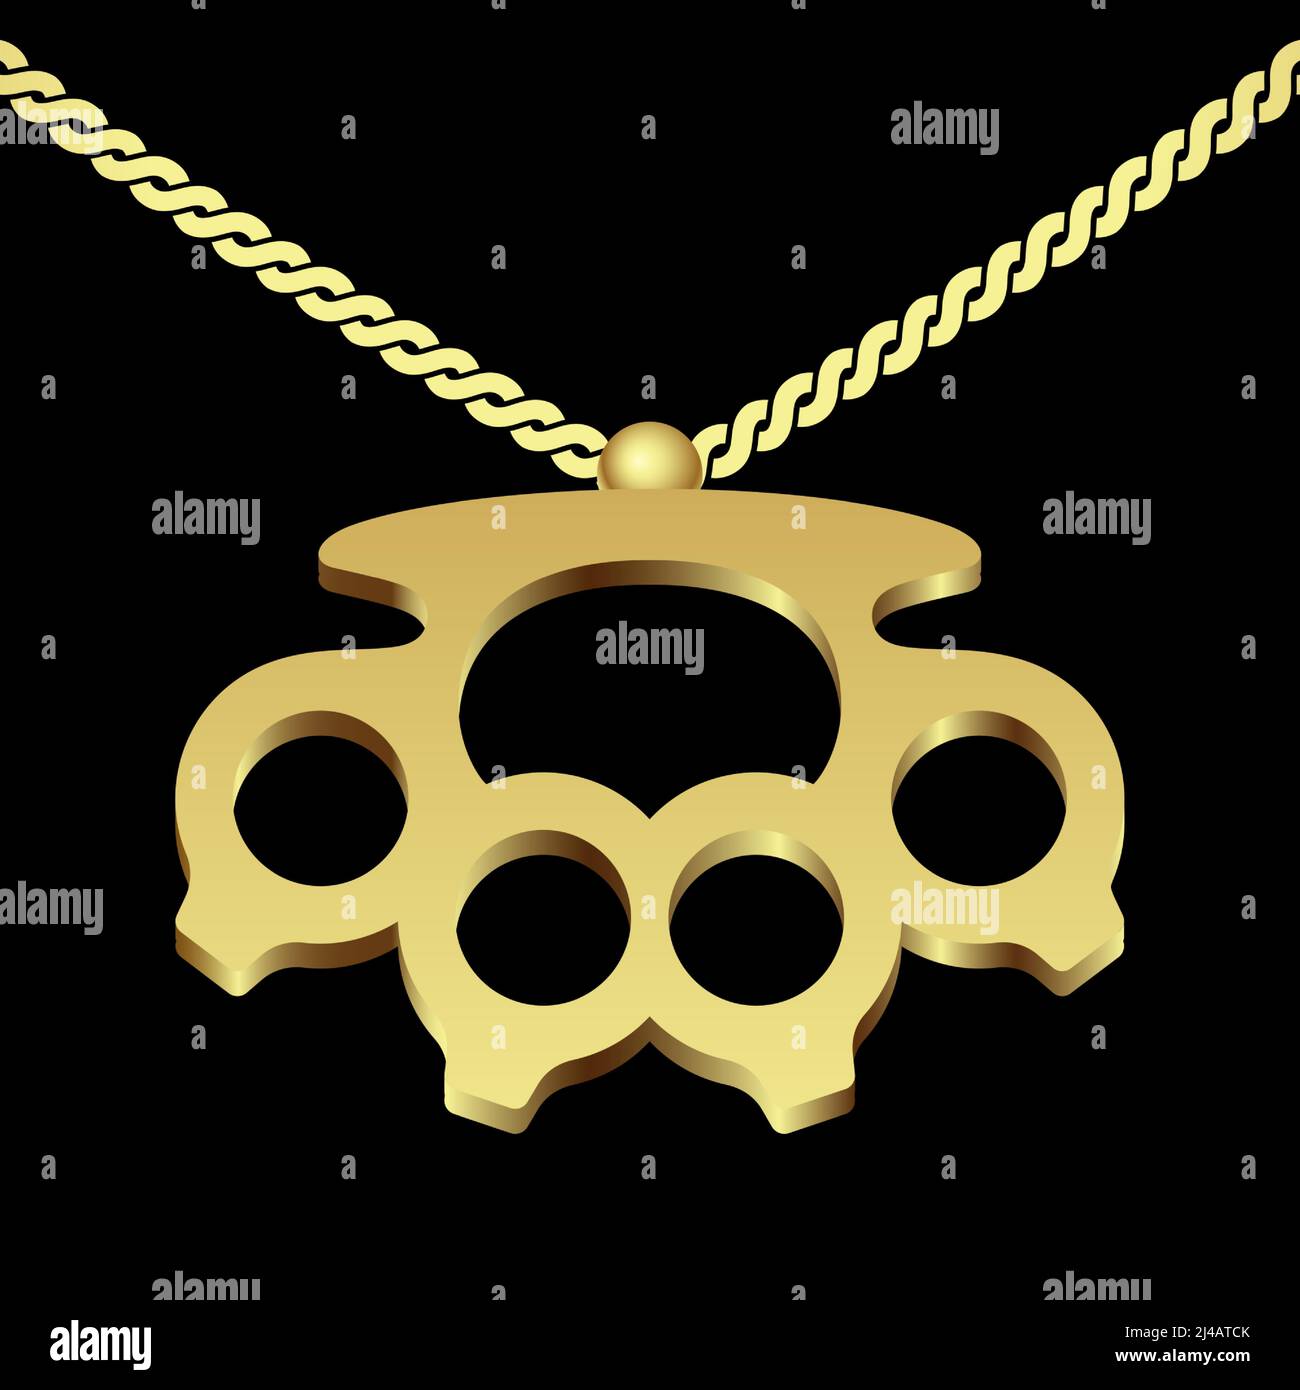 Knuckle duster golden pendant necklace hanging on a chain, vector illustration, isolated on black background. Stock Vector